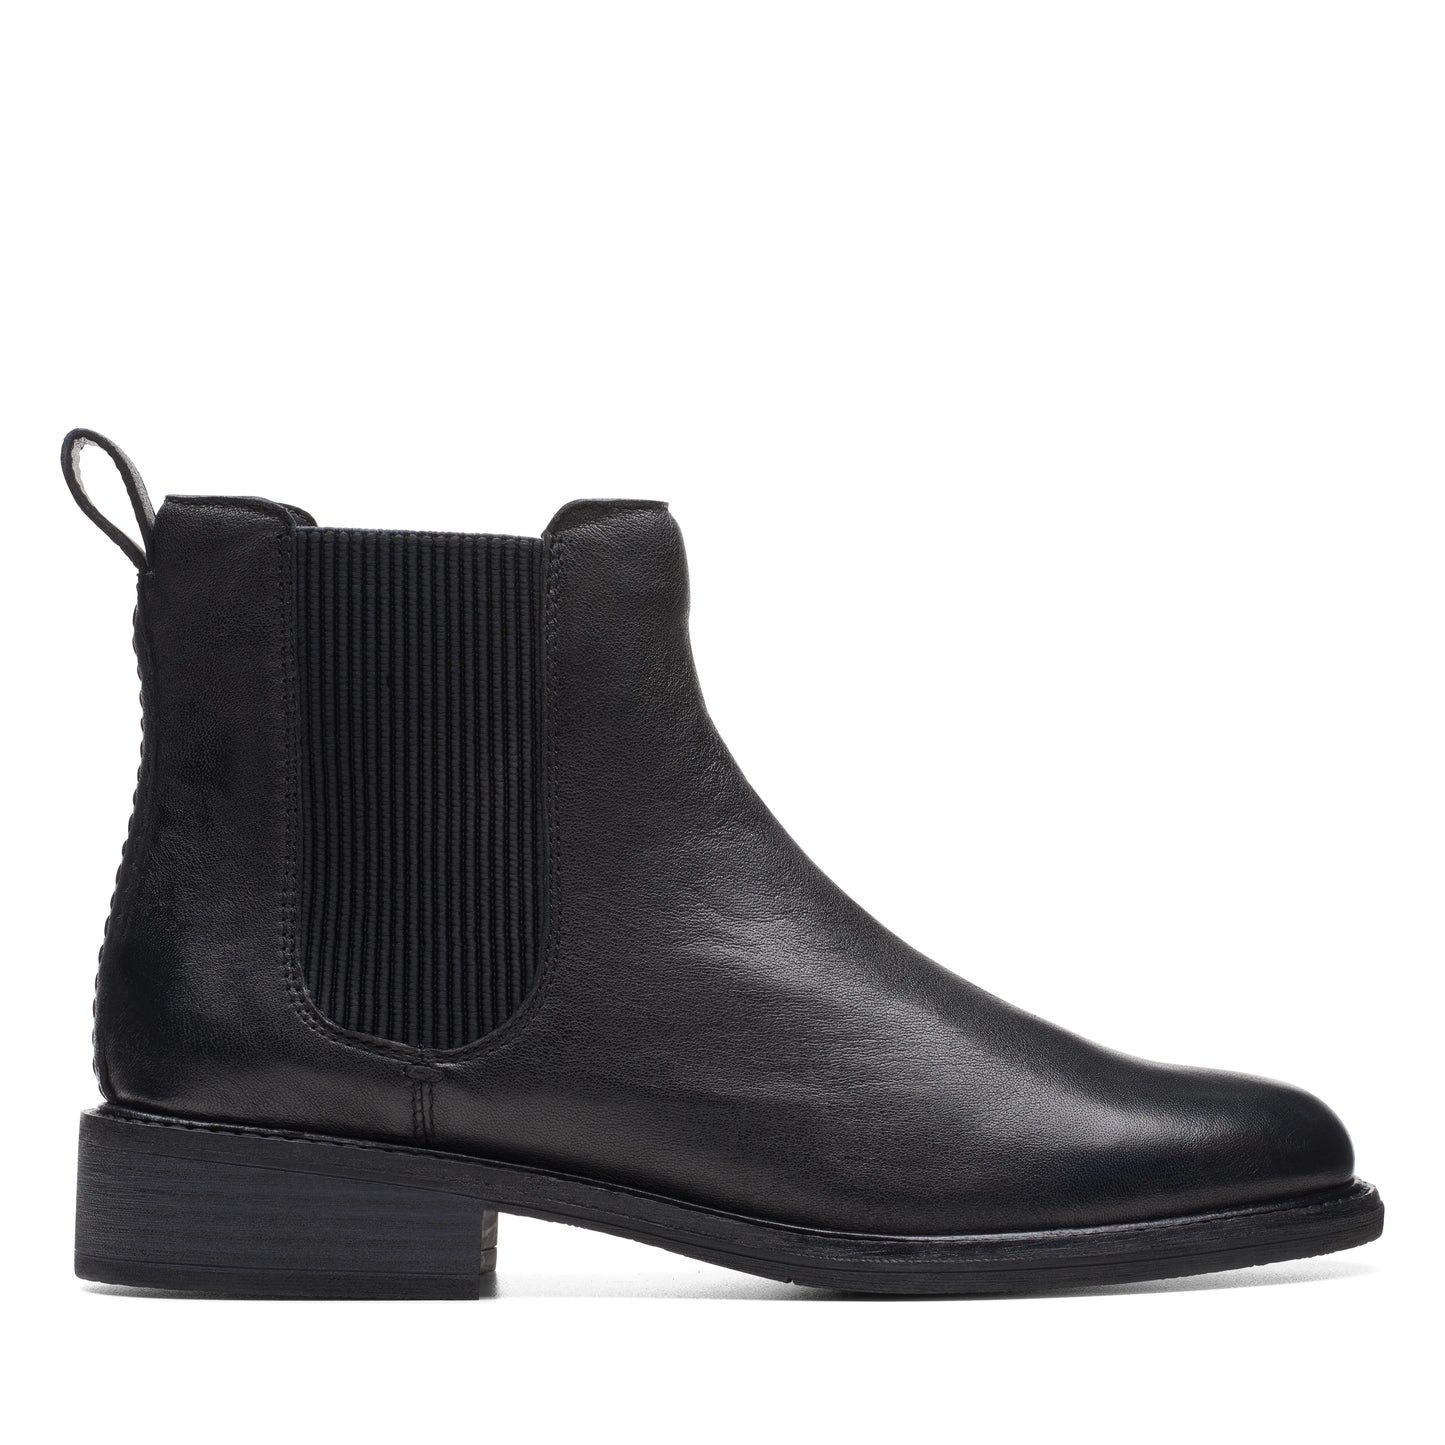 CLARKS | BOTINES CHELSEA MUJER | COLOGNE ARLO2 BLACK LEATHER | NEGRO